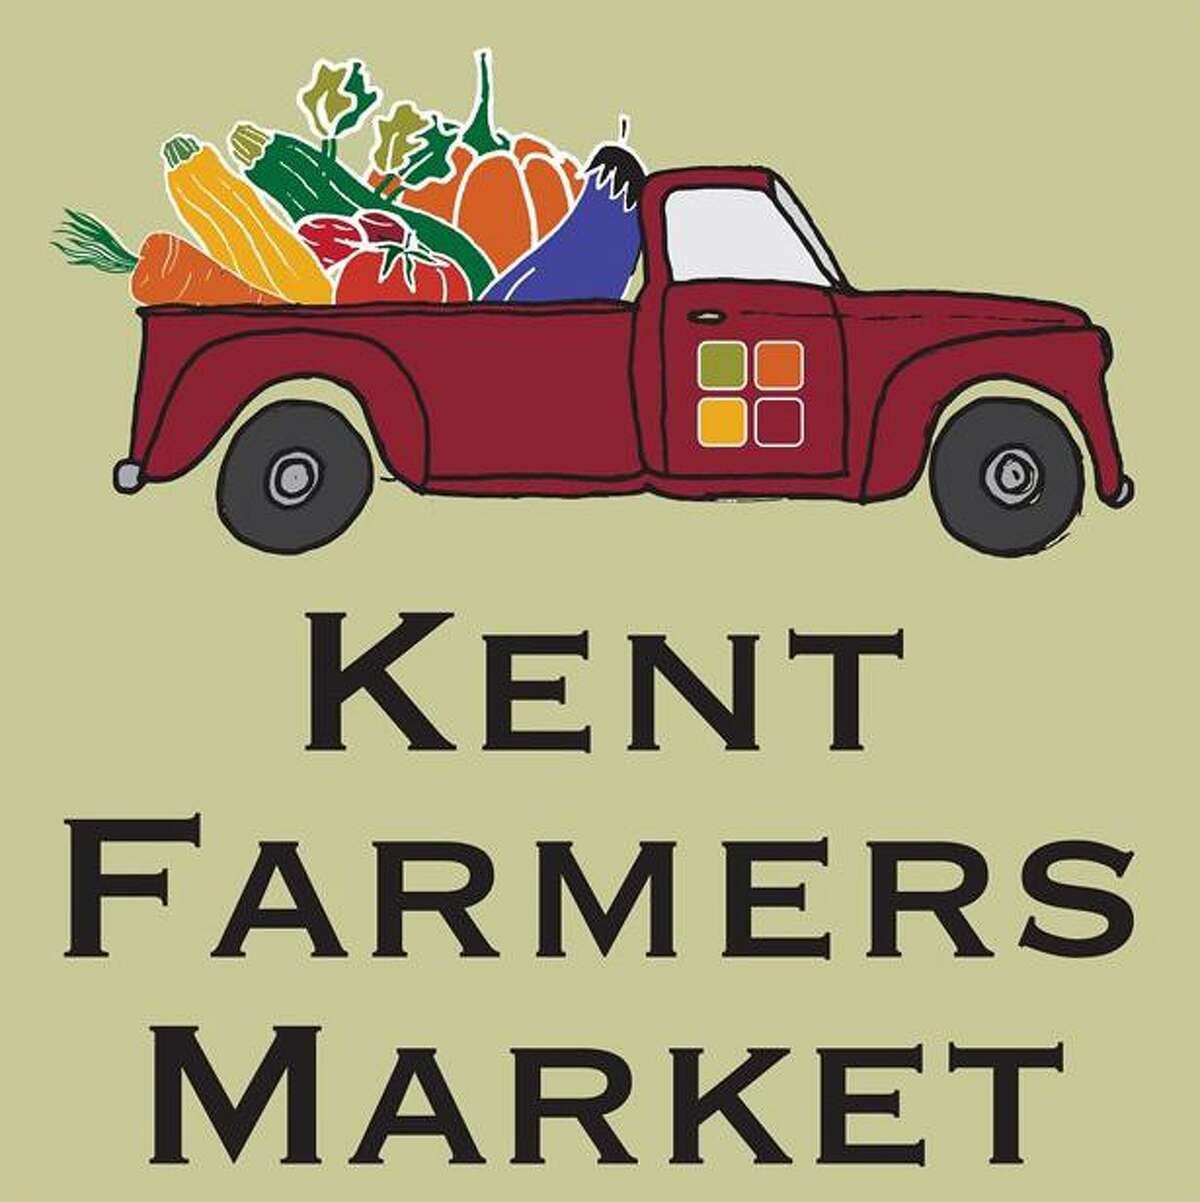 Kent Farmers Market to open for season May 21